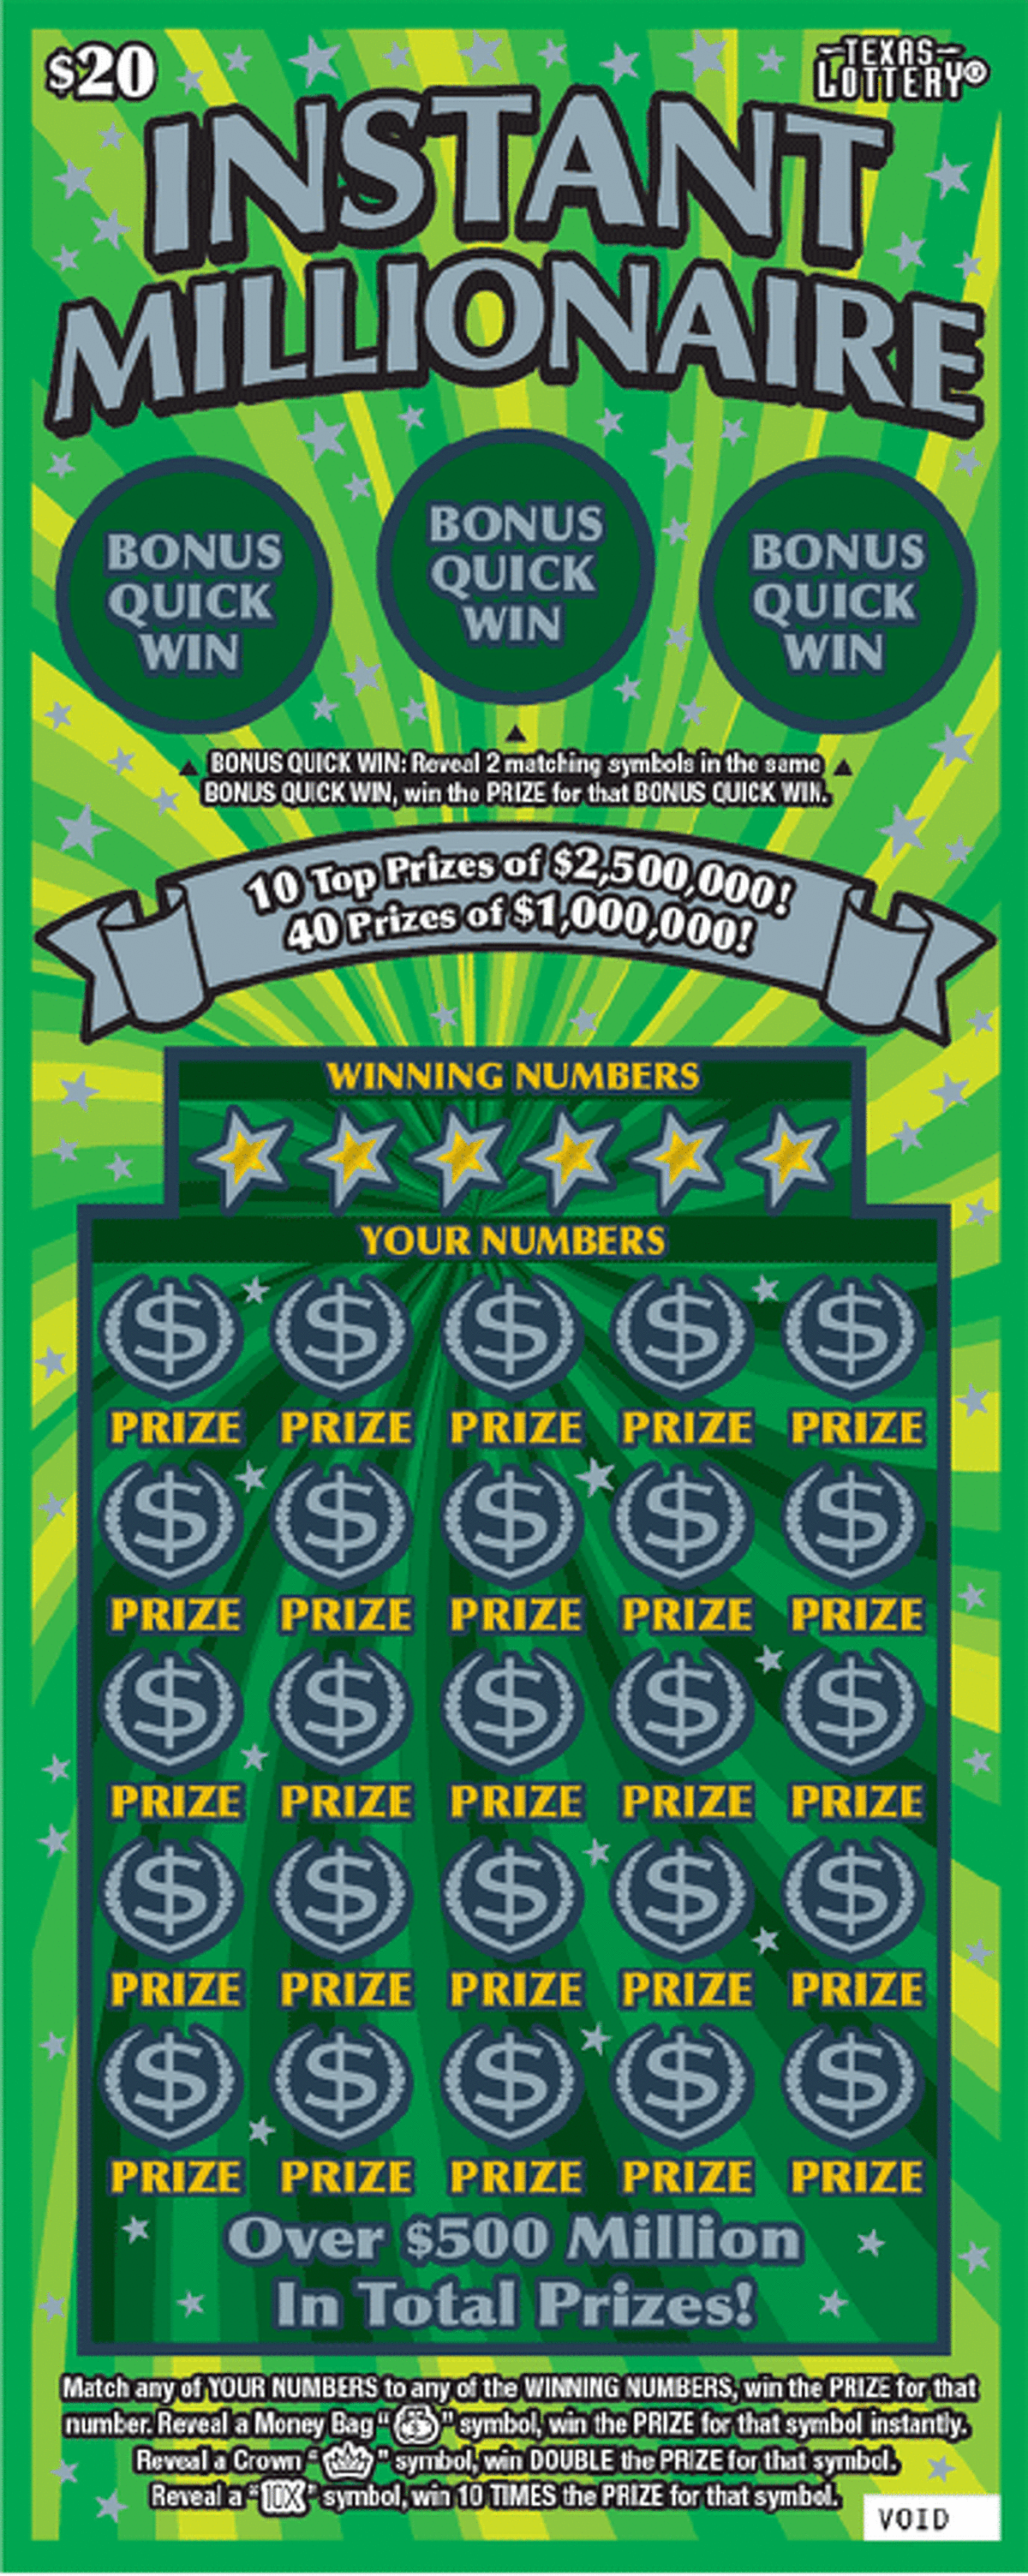 The winner, who is choosing to remain anonymous, claimed the $1 million scratch ticket prize from an Instant Millionaire game purchased at Zara Food Mart, located at 3620 S. Zarzamora St., according to the Texas Lottery Commission. Click through for a look at the biggest lottery wins in San Antonio >>>